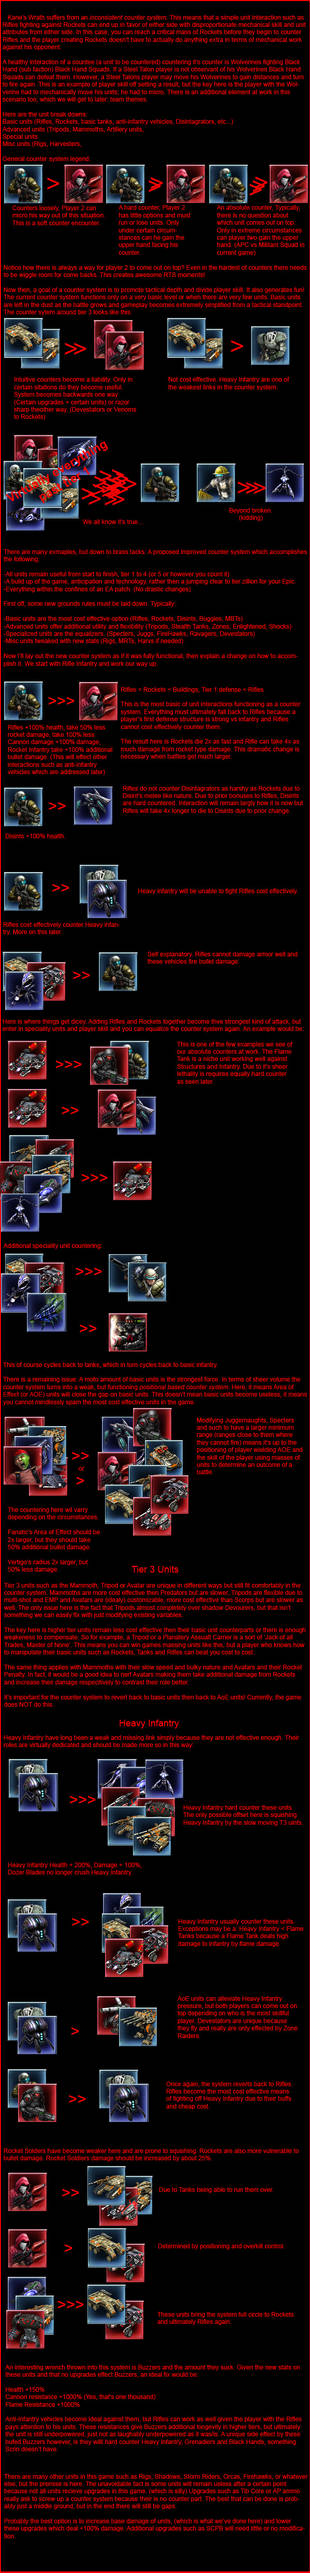 Kane's Wrath Counter System